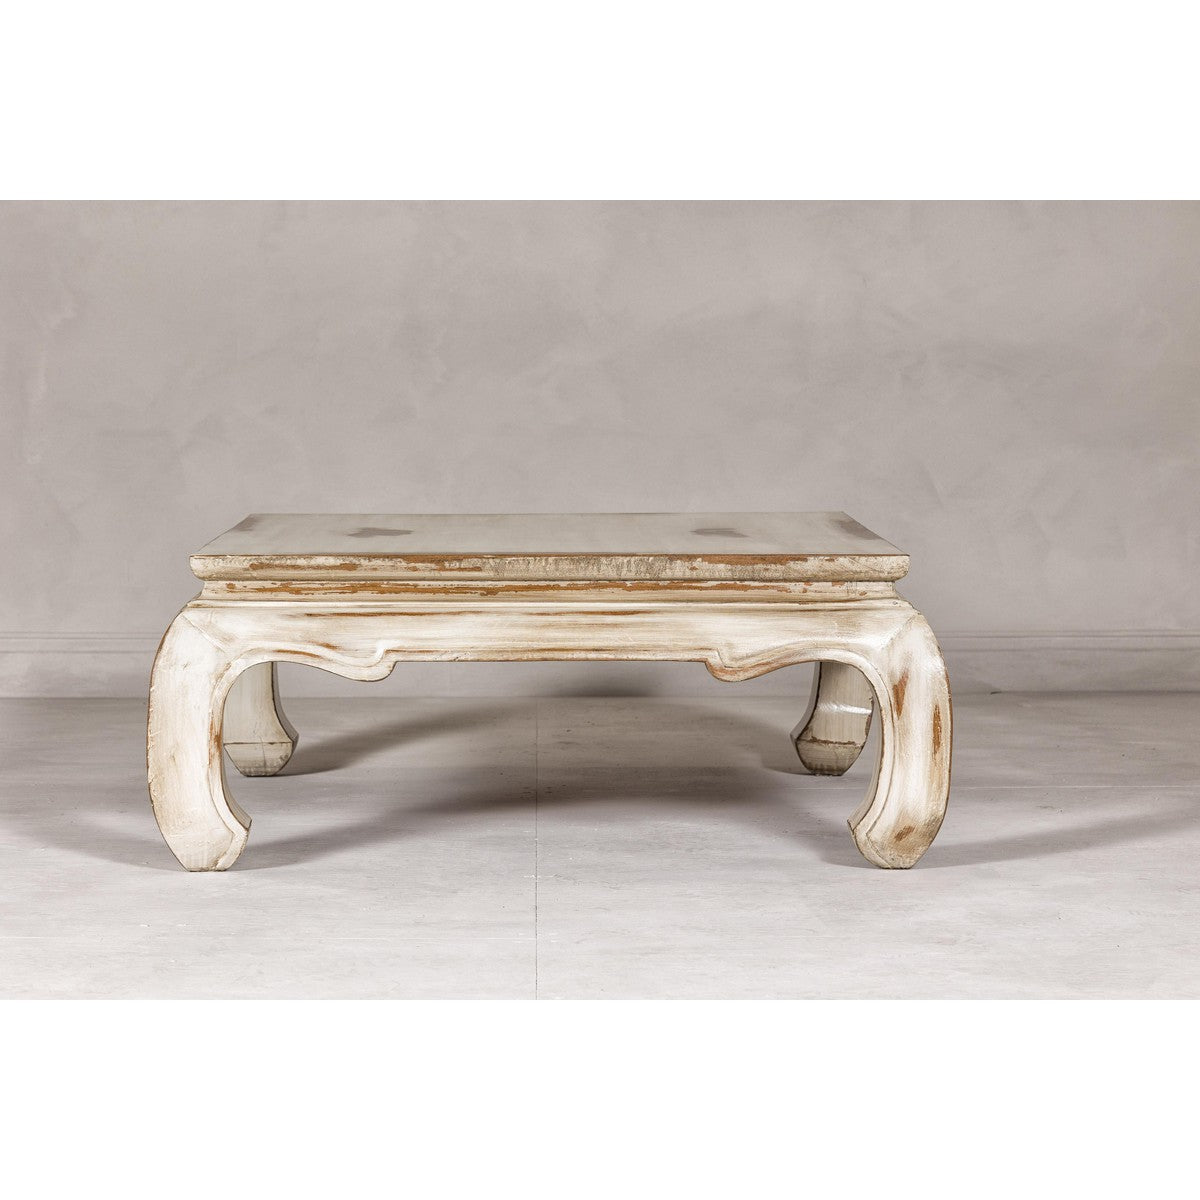 Distressed White Coffee Table with Chow Legs and Square Top, Vintage-YN7957-8. Asian & Chinese Furniture, Art, Antiques, Vintage Home Décor for sale at FEA Home